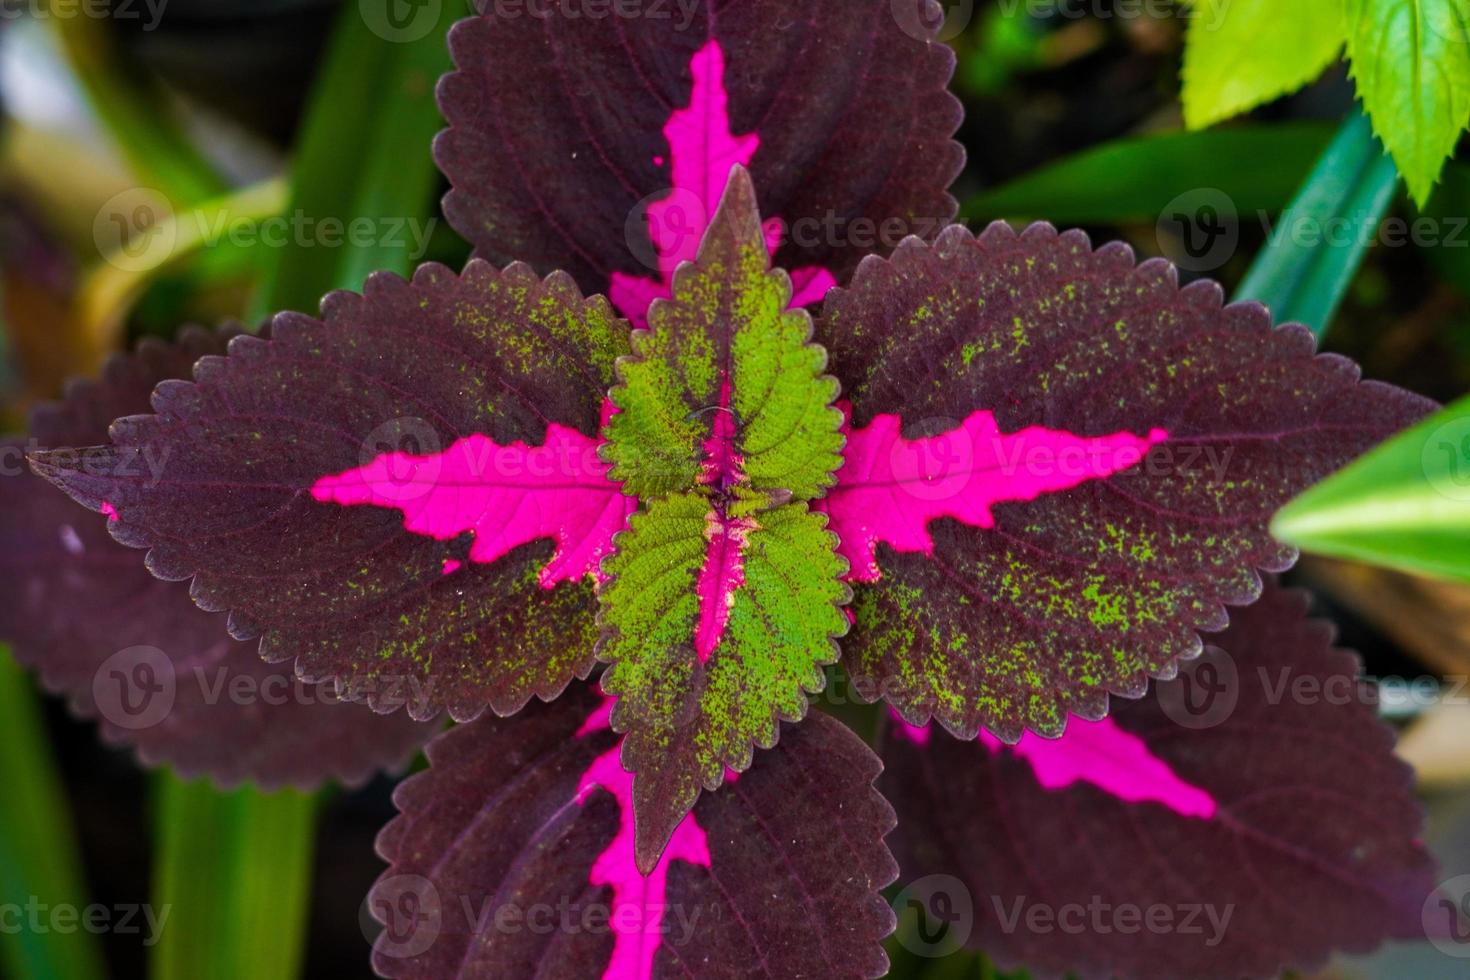 Coleus scutellarioides, commonly known as coleus, is a species of flowering plant in the family Lamiaceae , native to southeast Asia through to Australia, earth day, fresh nature background photo